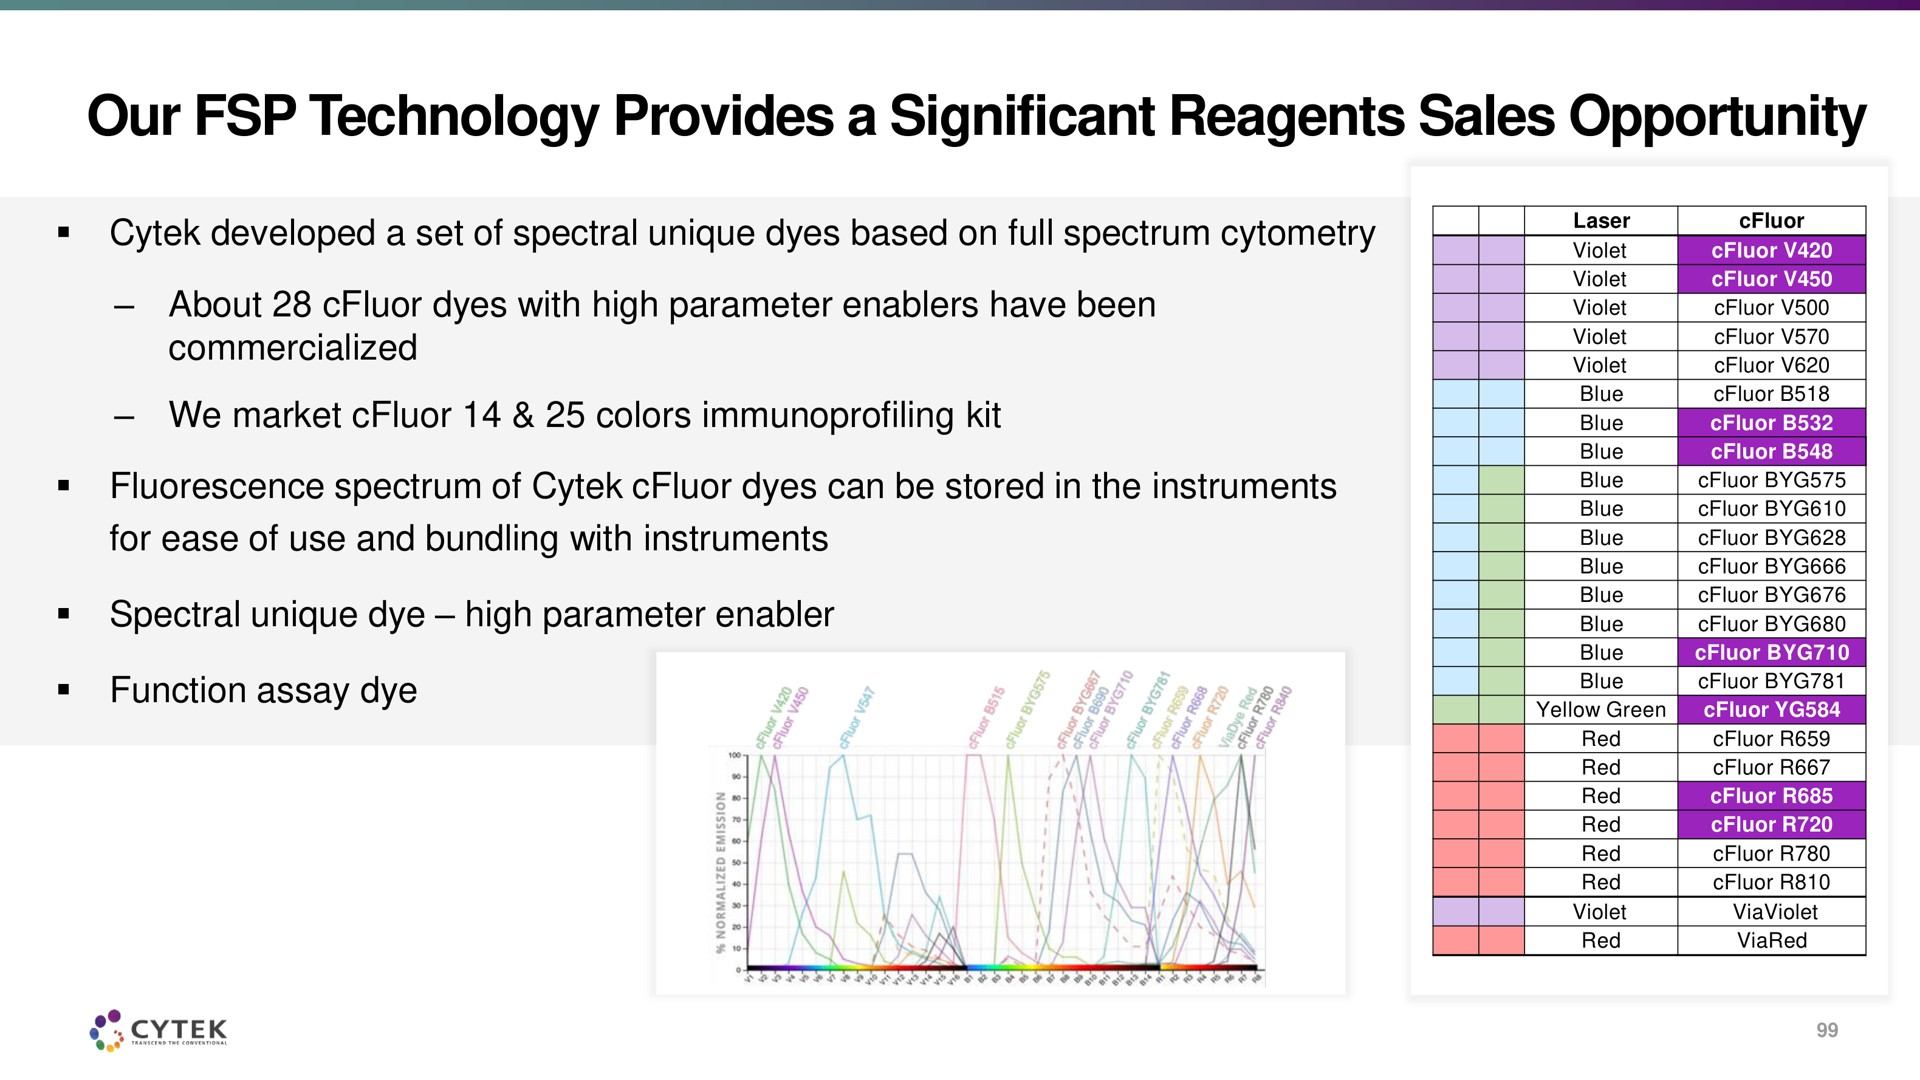 our technology provides a significant reagents sales opportunity | Cytek